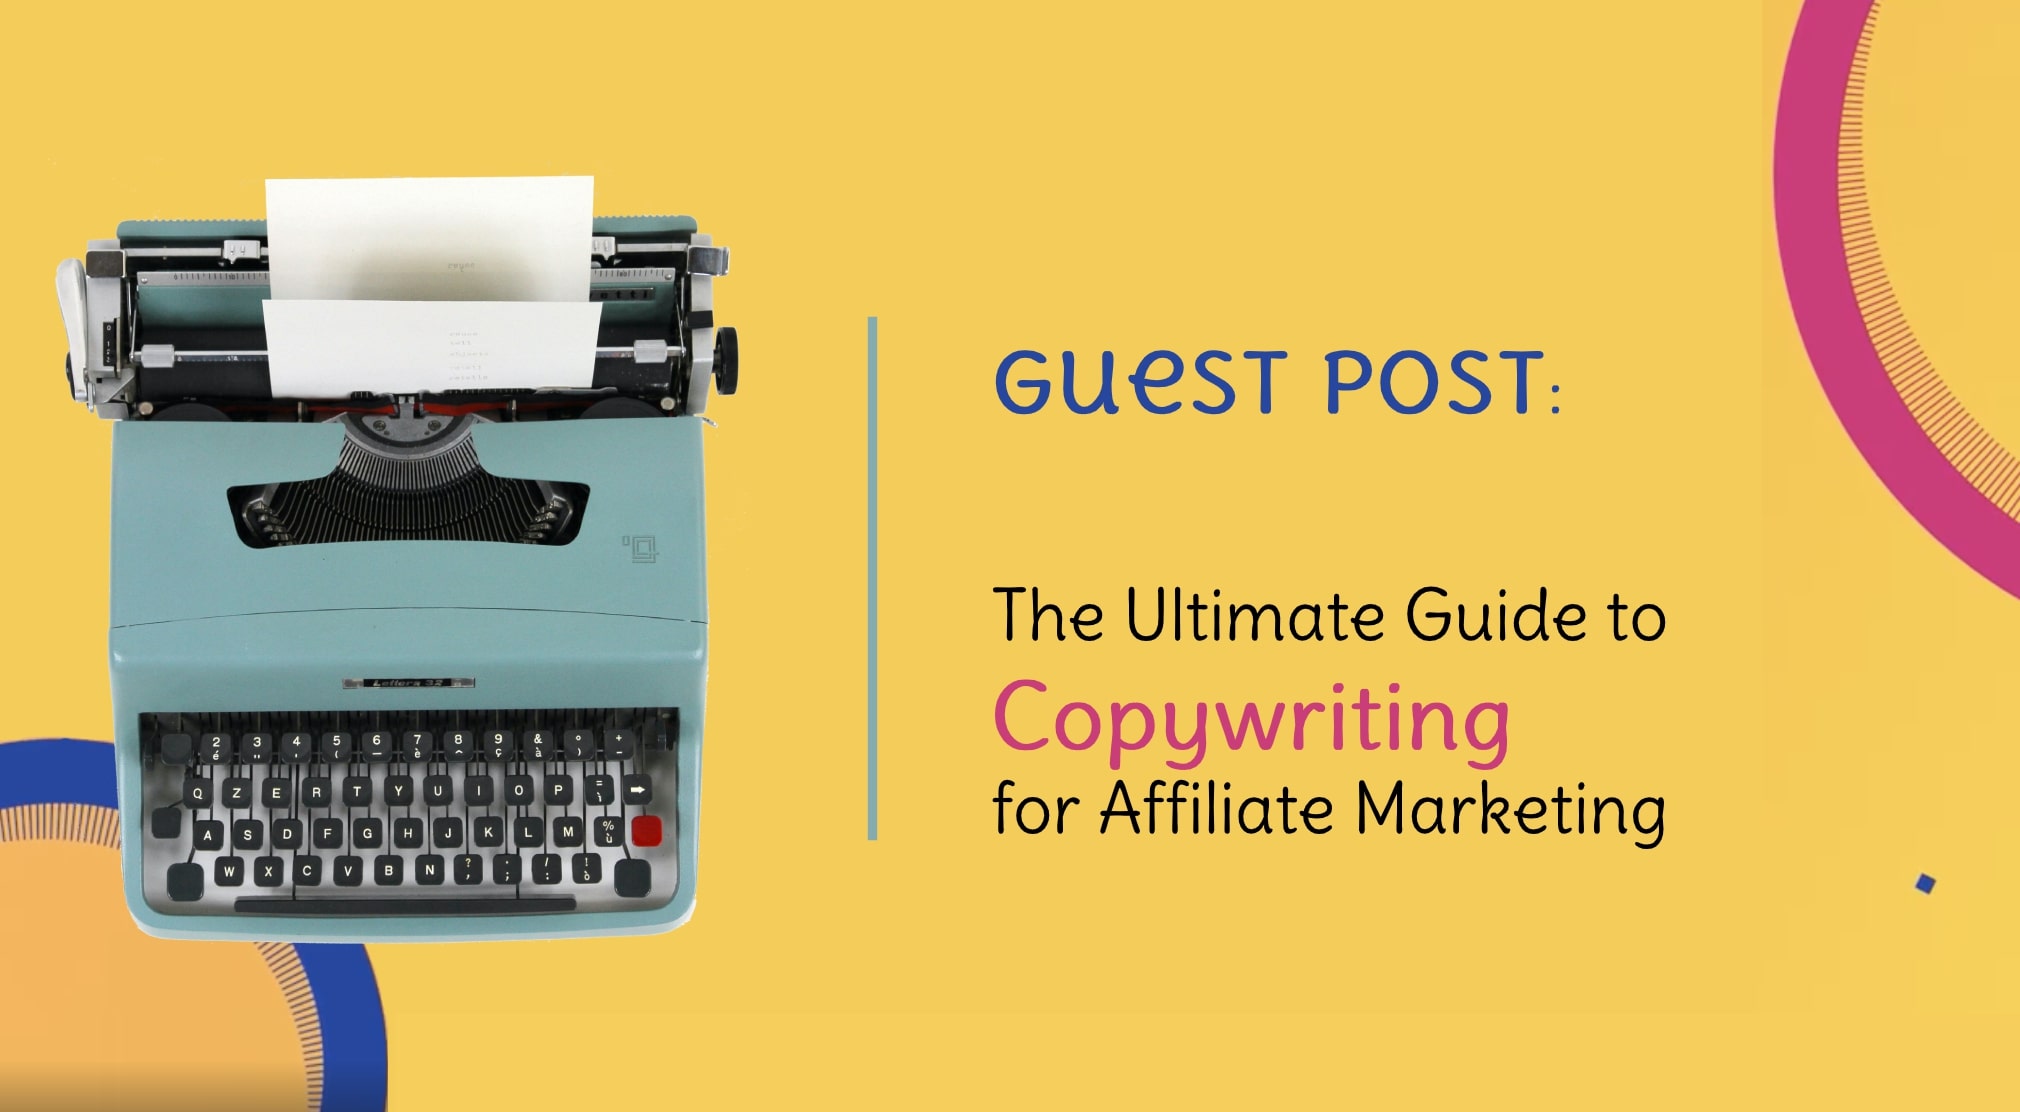 [Guest Post] The Ultimate Guide to Copywriting for Affiliate Marketing